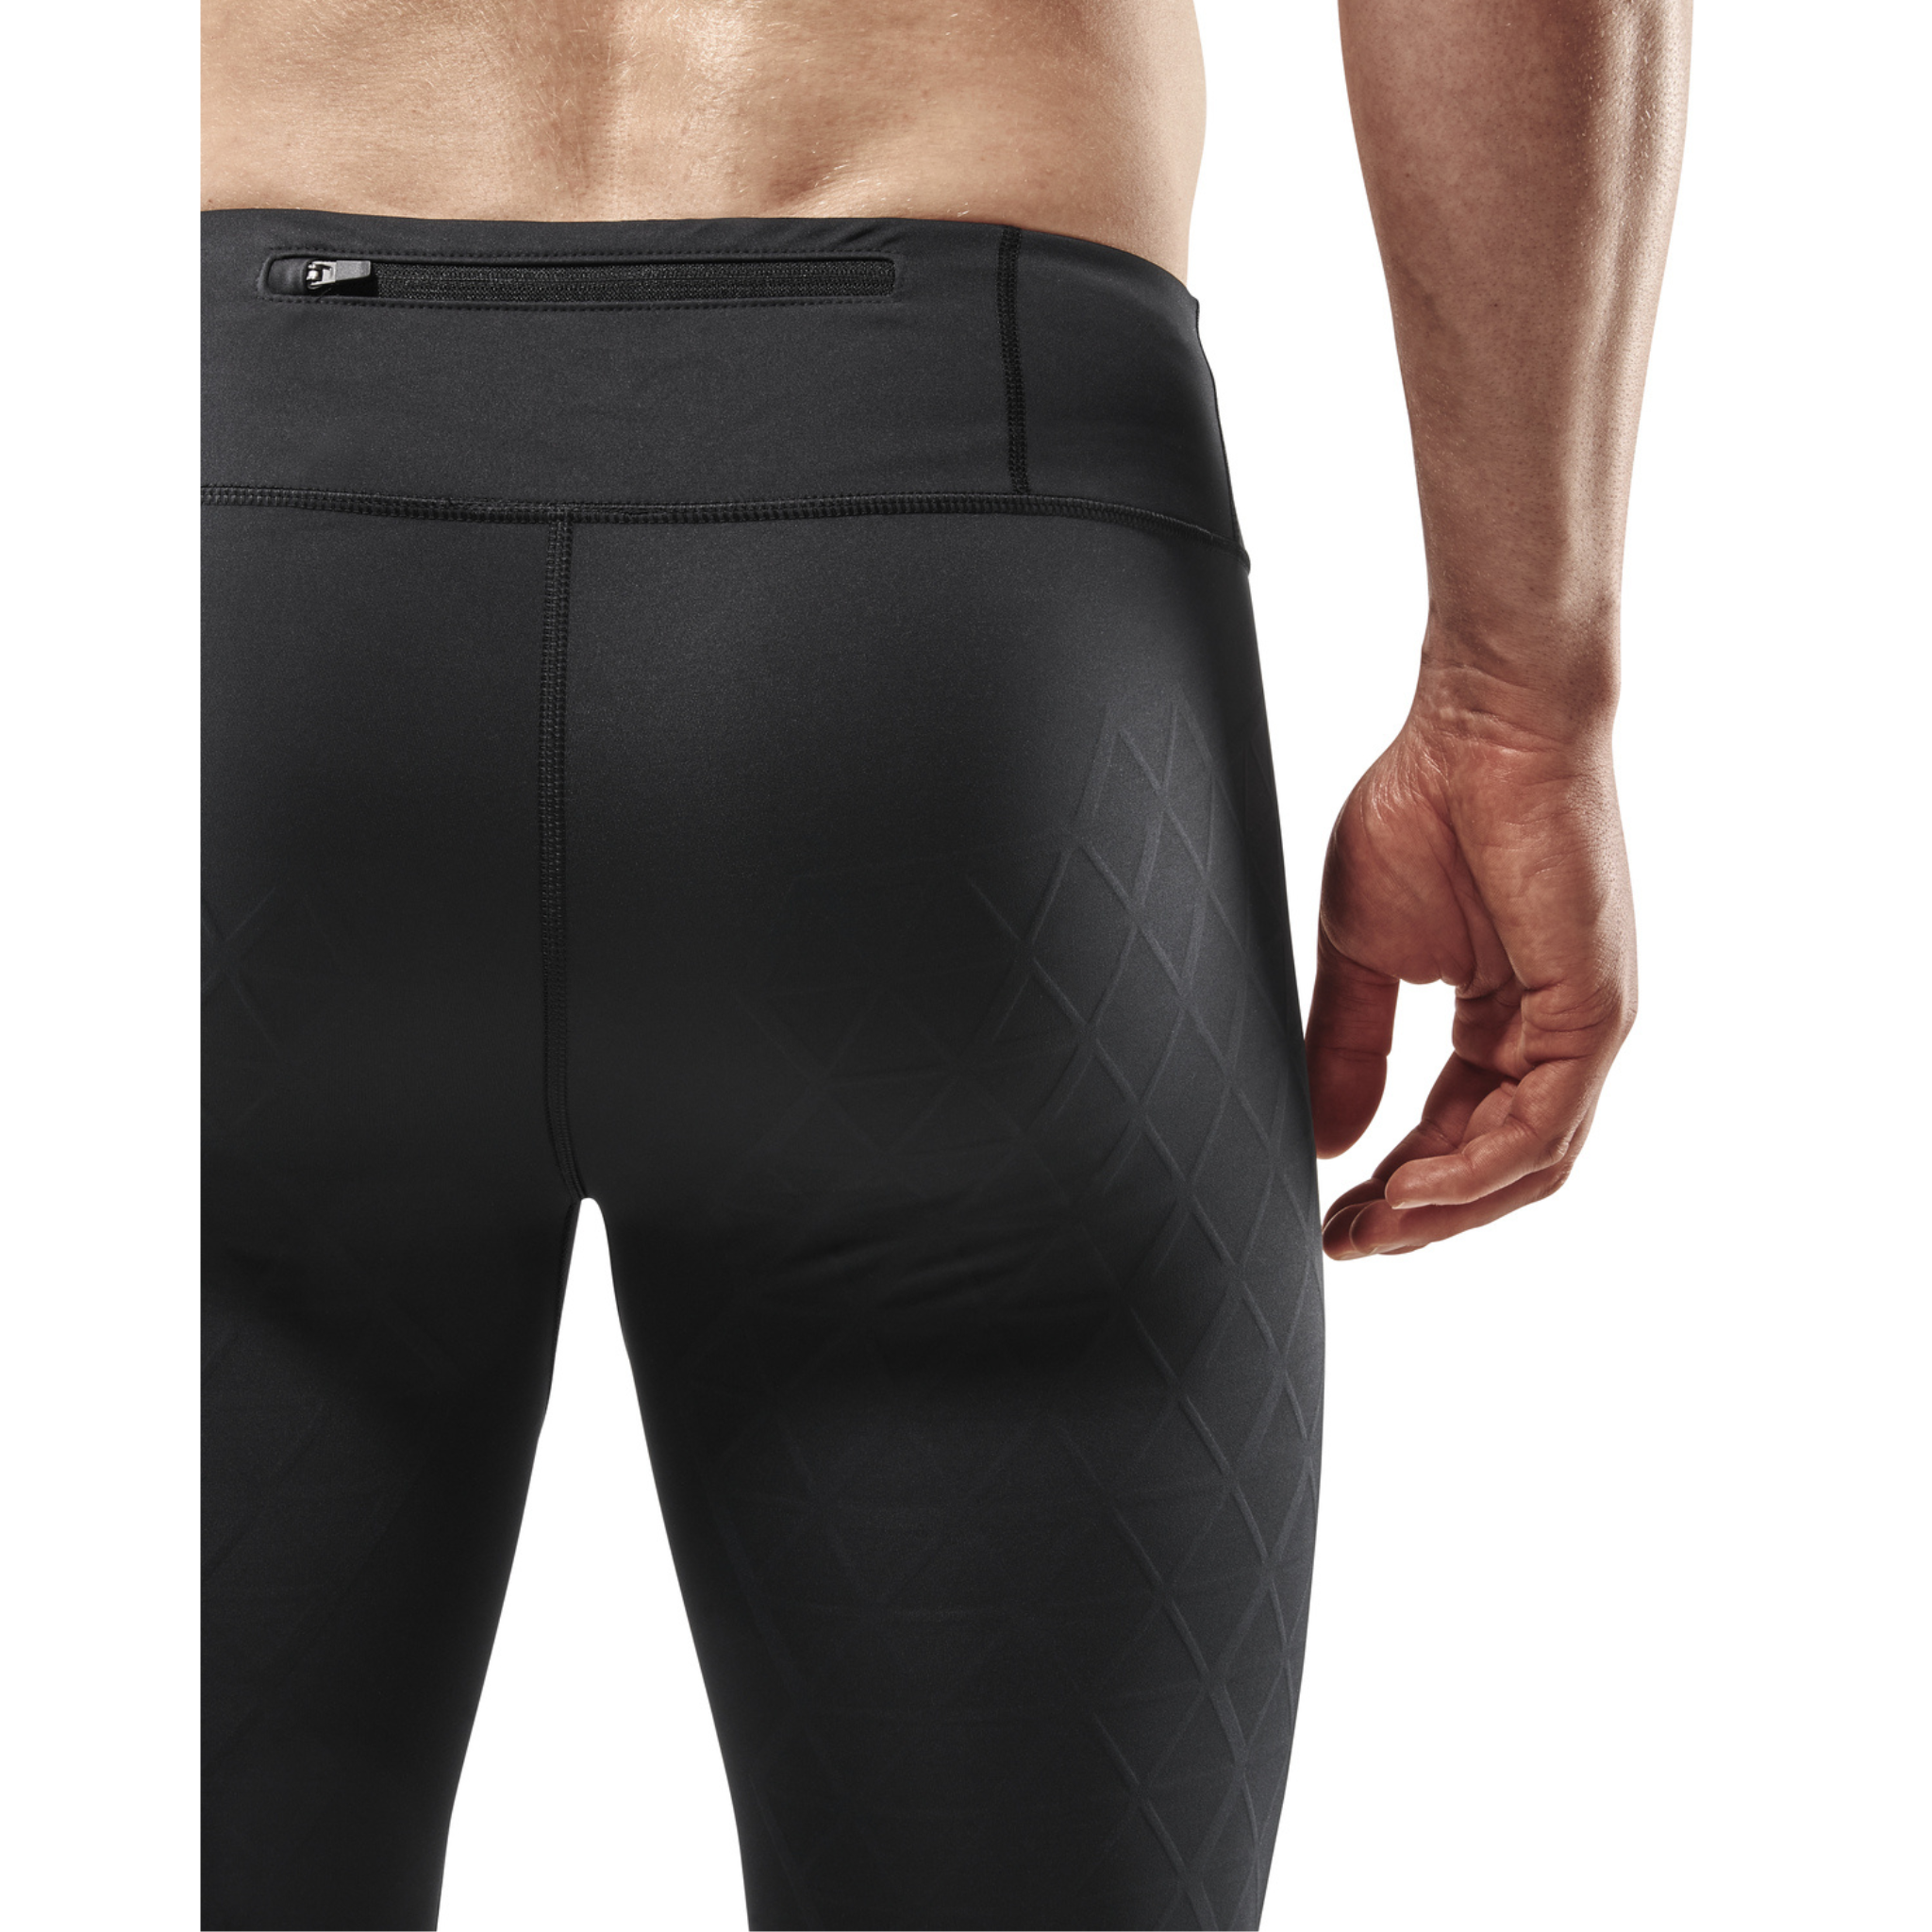 Buy Runhit Compression Pants Men with Pocket,2 Pack Spandex Running Pants  for Men Tights and Leggings Workout Athletic Shorts Base Layer at Amazon.in